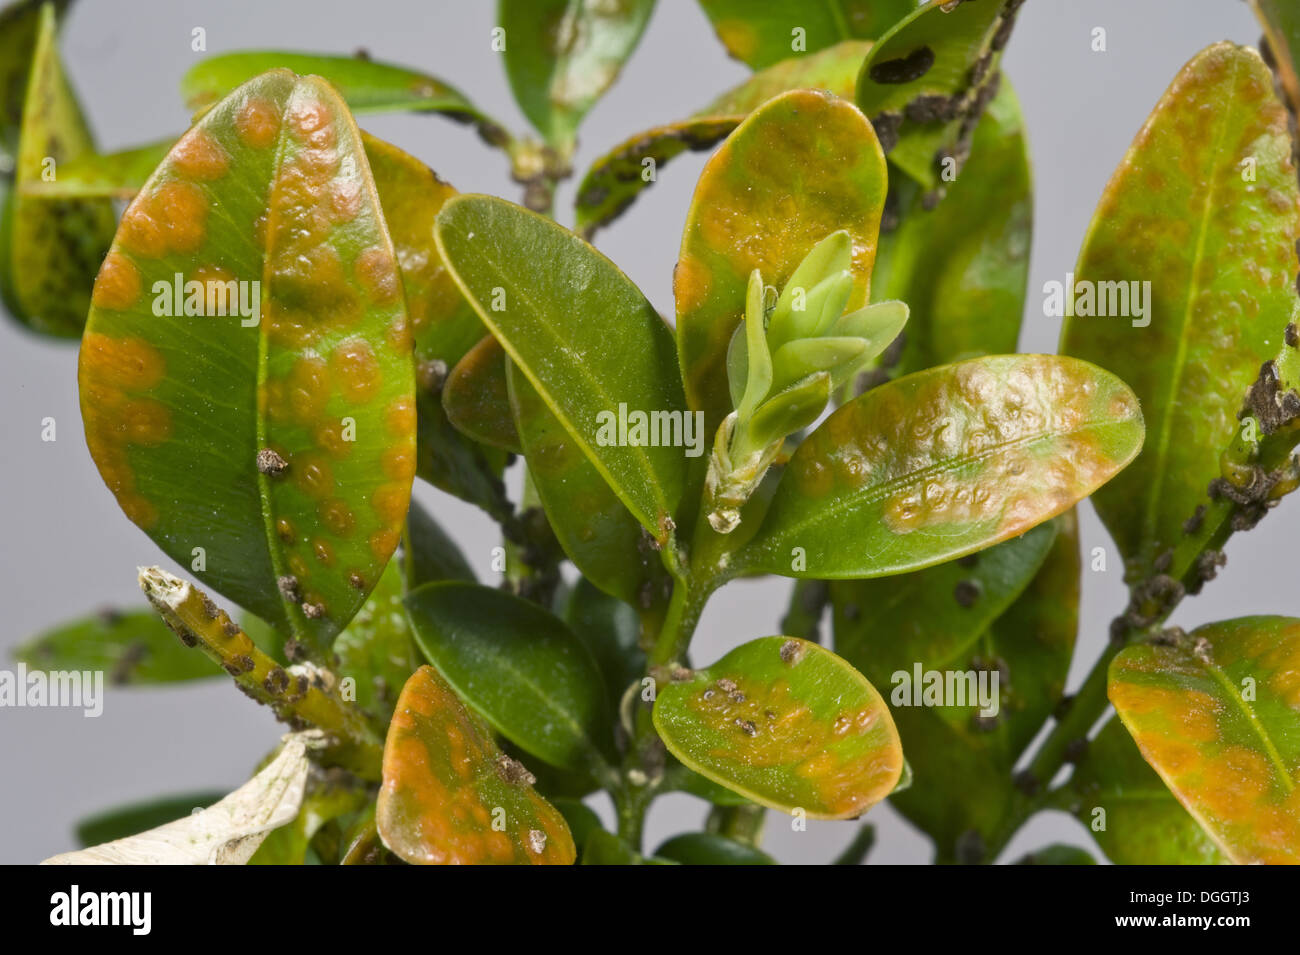 Box rust, Puccia buxi, pustules on the upper surface of a diseased parterre hedge leaves Stock Photo